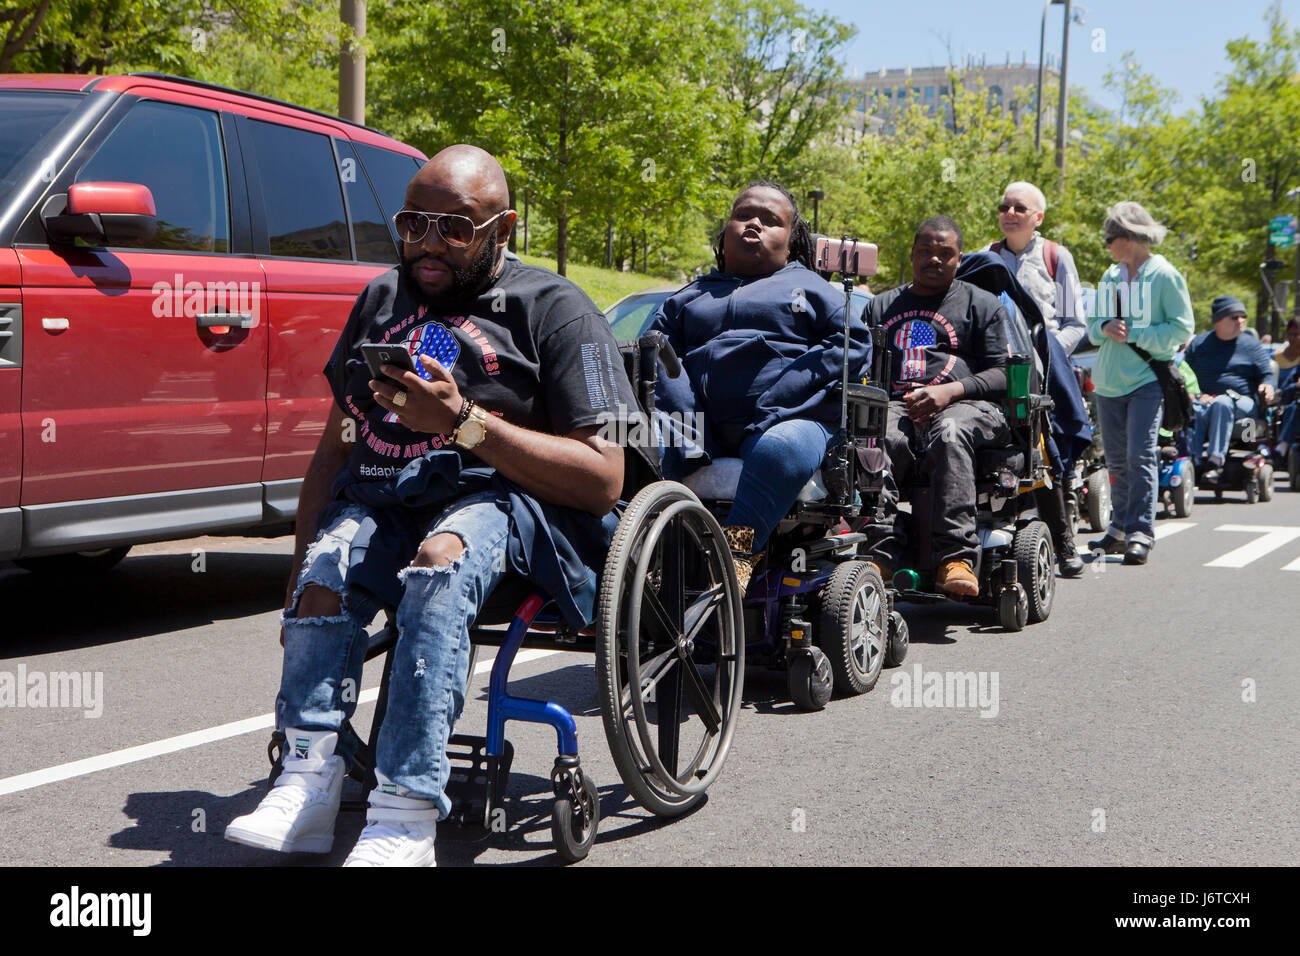 May 15, 2017, Washington, DC USA:  Members of ADAPT and disability activists, many in wheelchairs, protest and demand disability rights. Stock Photo